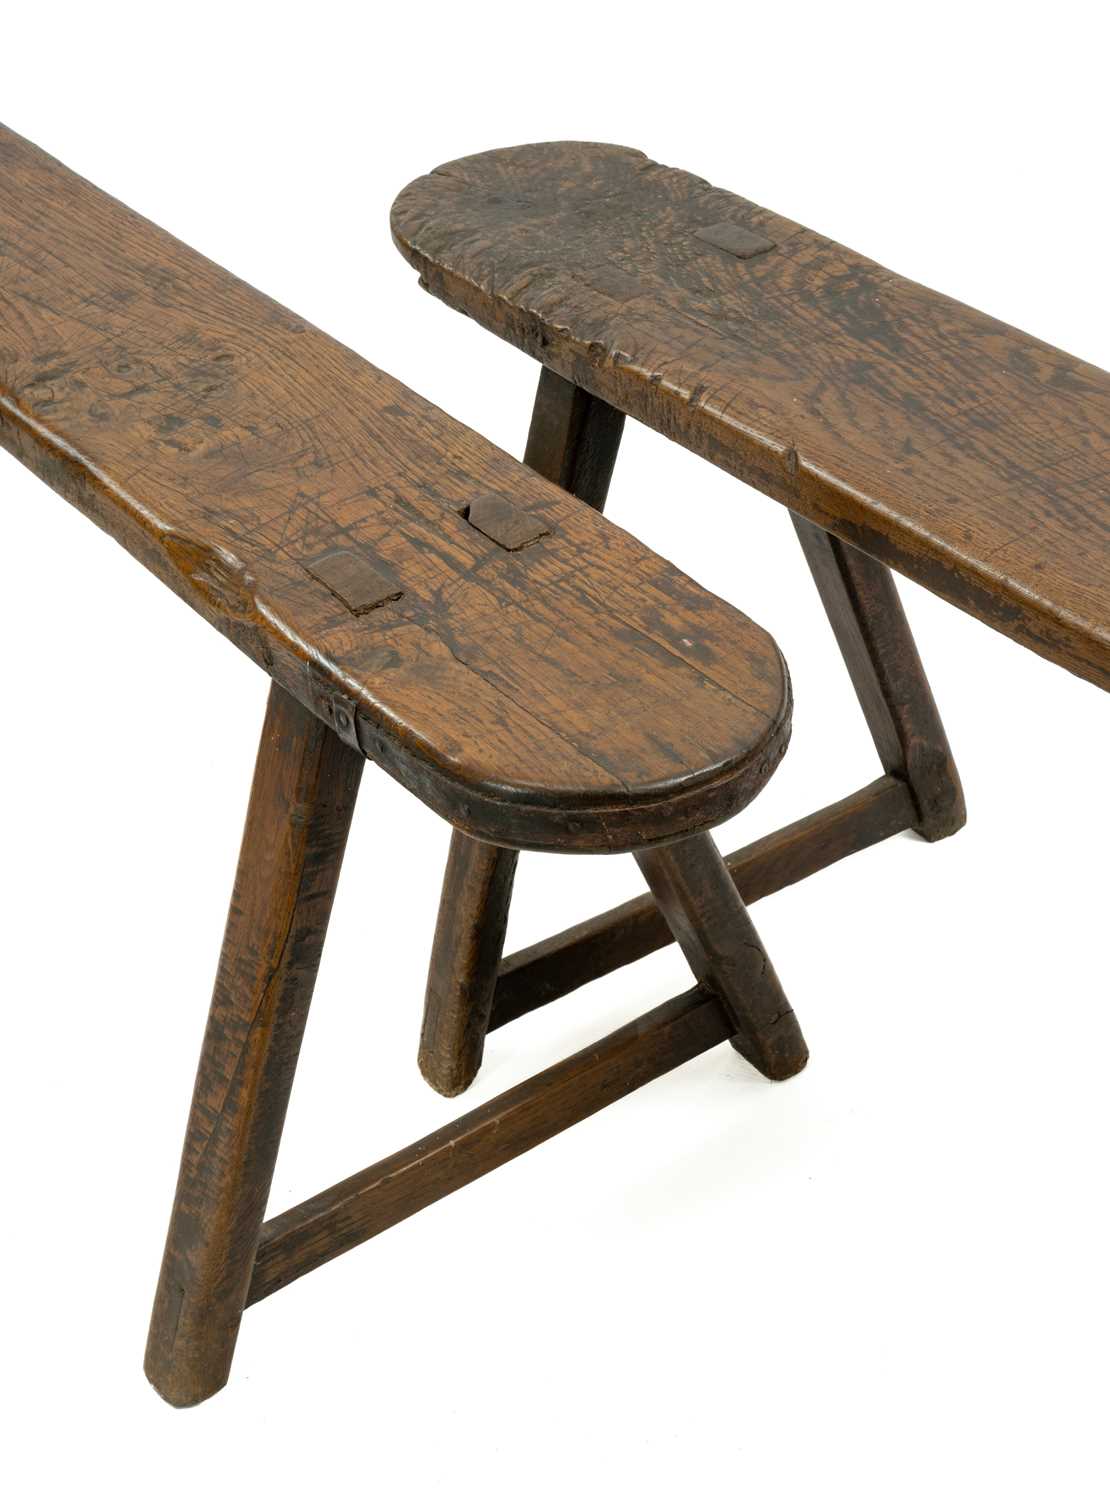 PAIR PRIMITIVE JOINED OAK LONG BENCHES, 19th Century, on A-shaped trestle end supports mortised